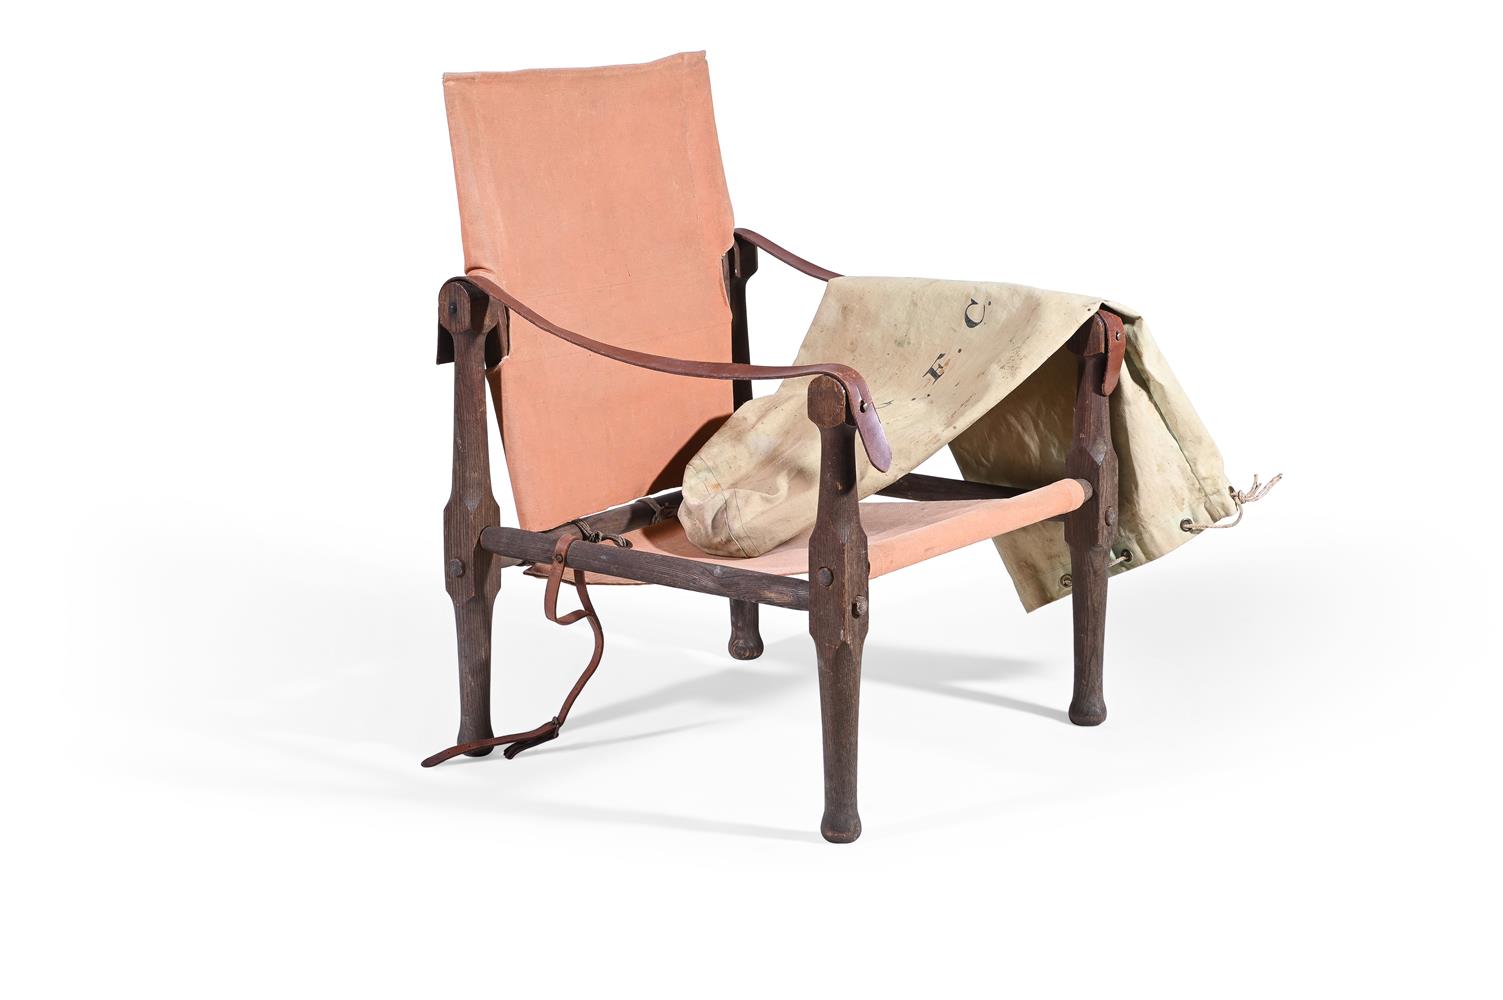 A PAIR OF 'ROORKHEE' CAMPAIGN CHAIRS, EARLY 20TH CENTURY - Image 2 of 6